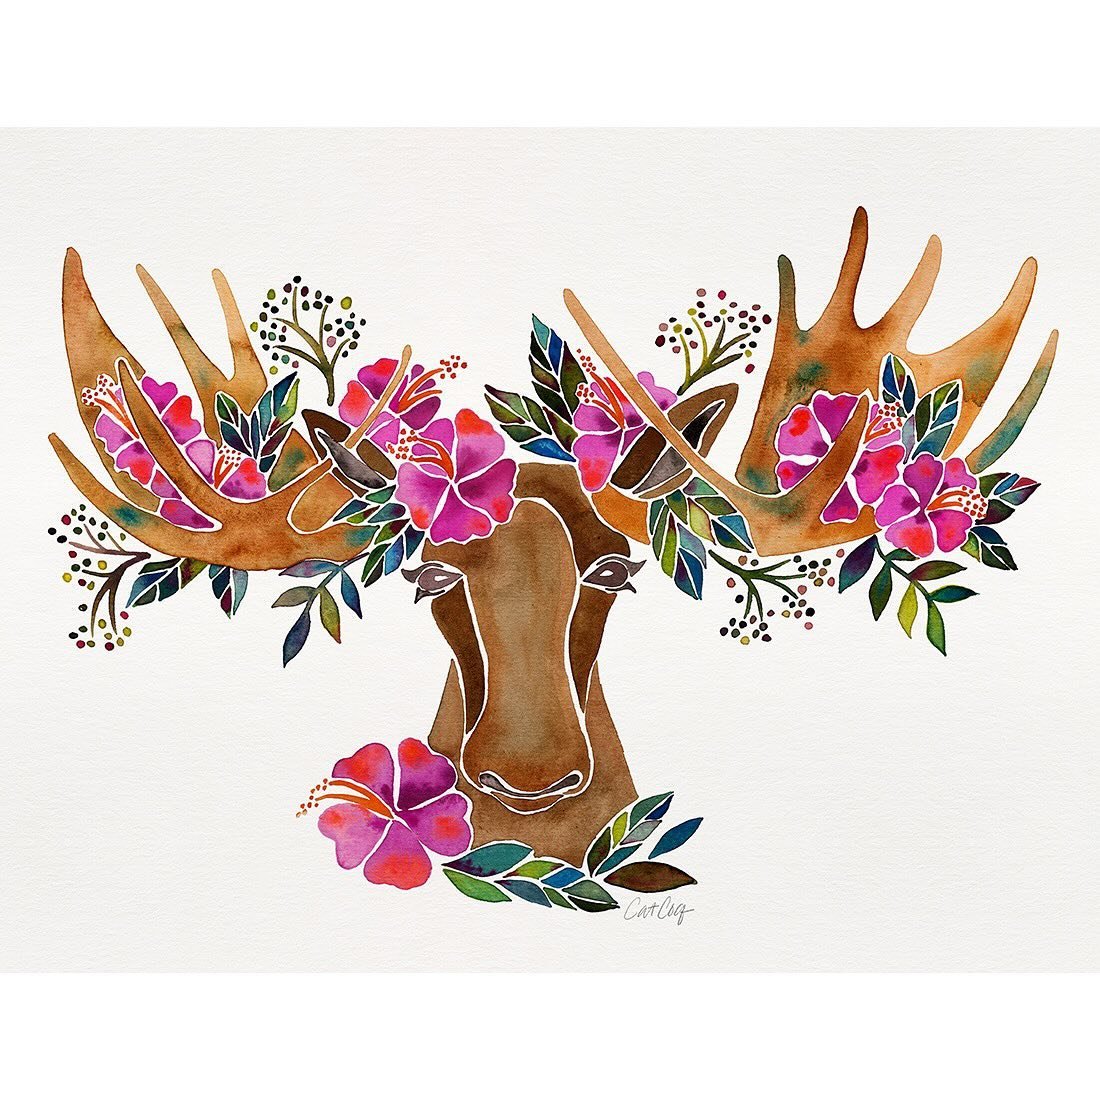 Watercolor Floral Moose! Swipe over to see the process shots as I sketched and painted this beauty. 🌺 I made this artwork while I was spending the spring/summer in a wood cabin in the remote Colorado Rockies. 🏔️

I remember my first moose sighting.